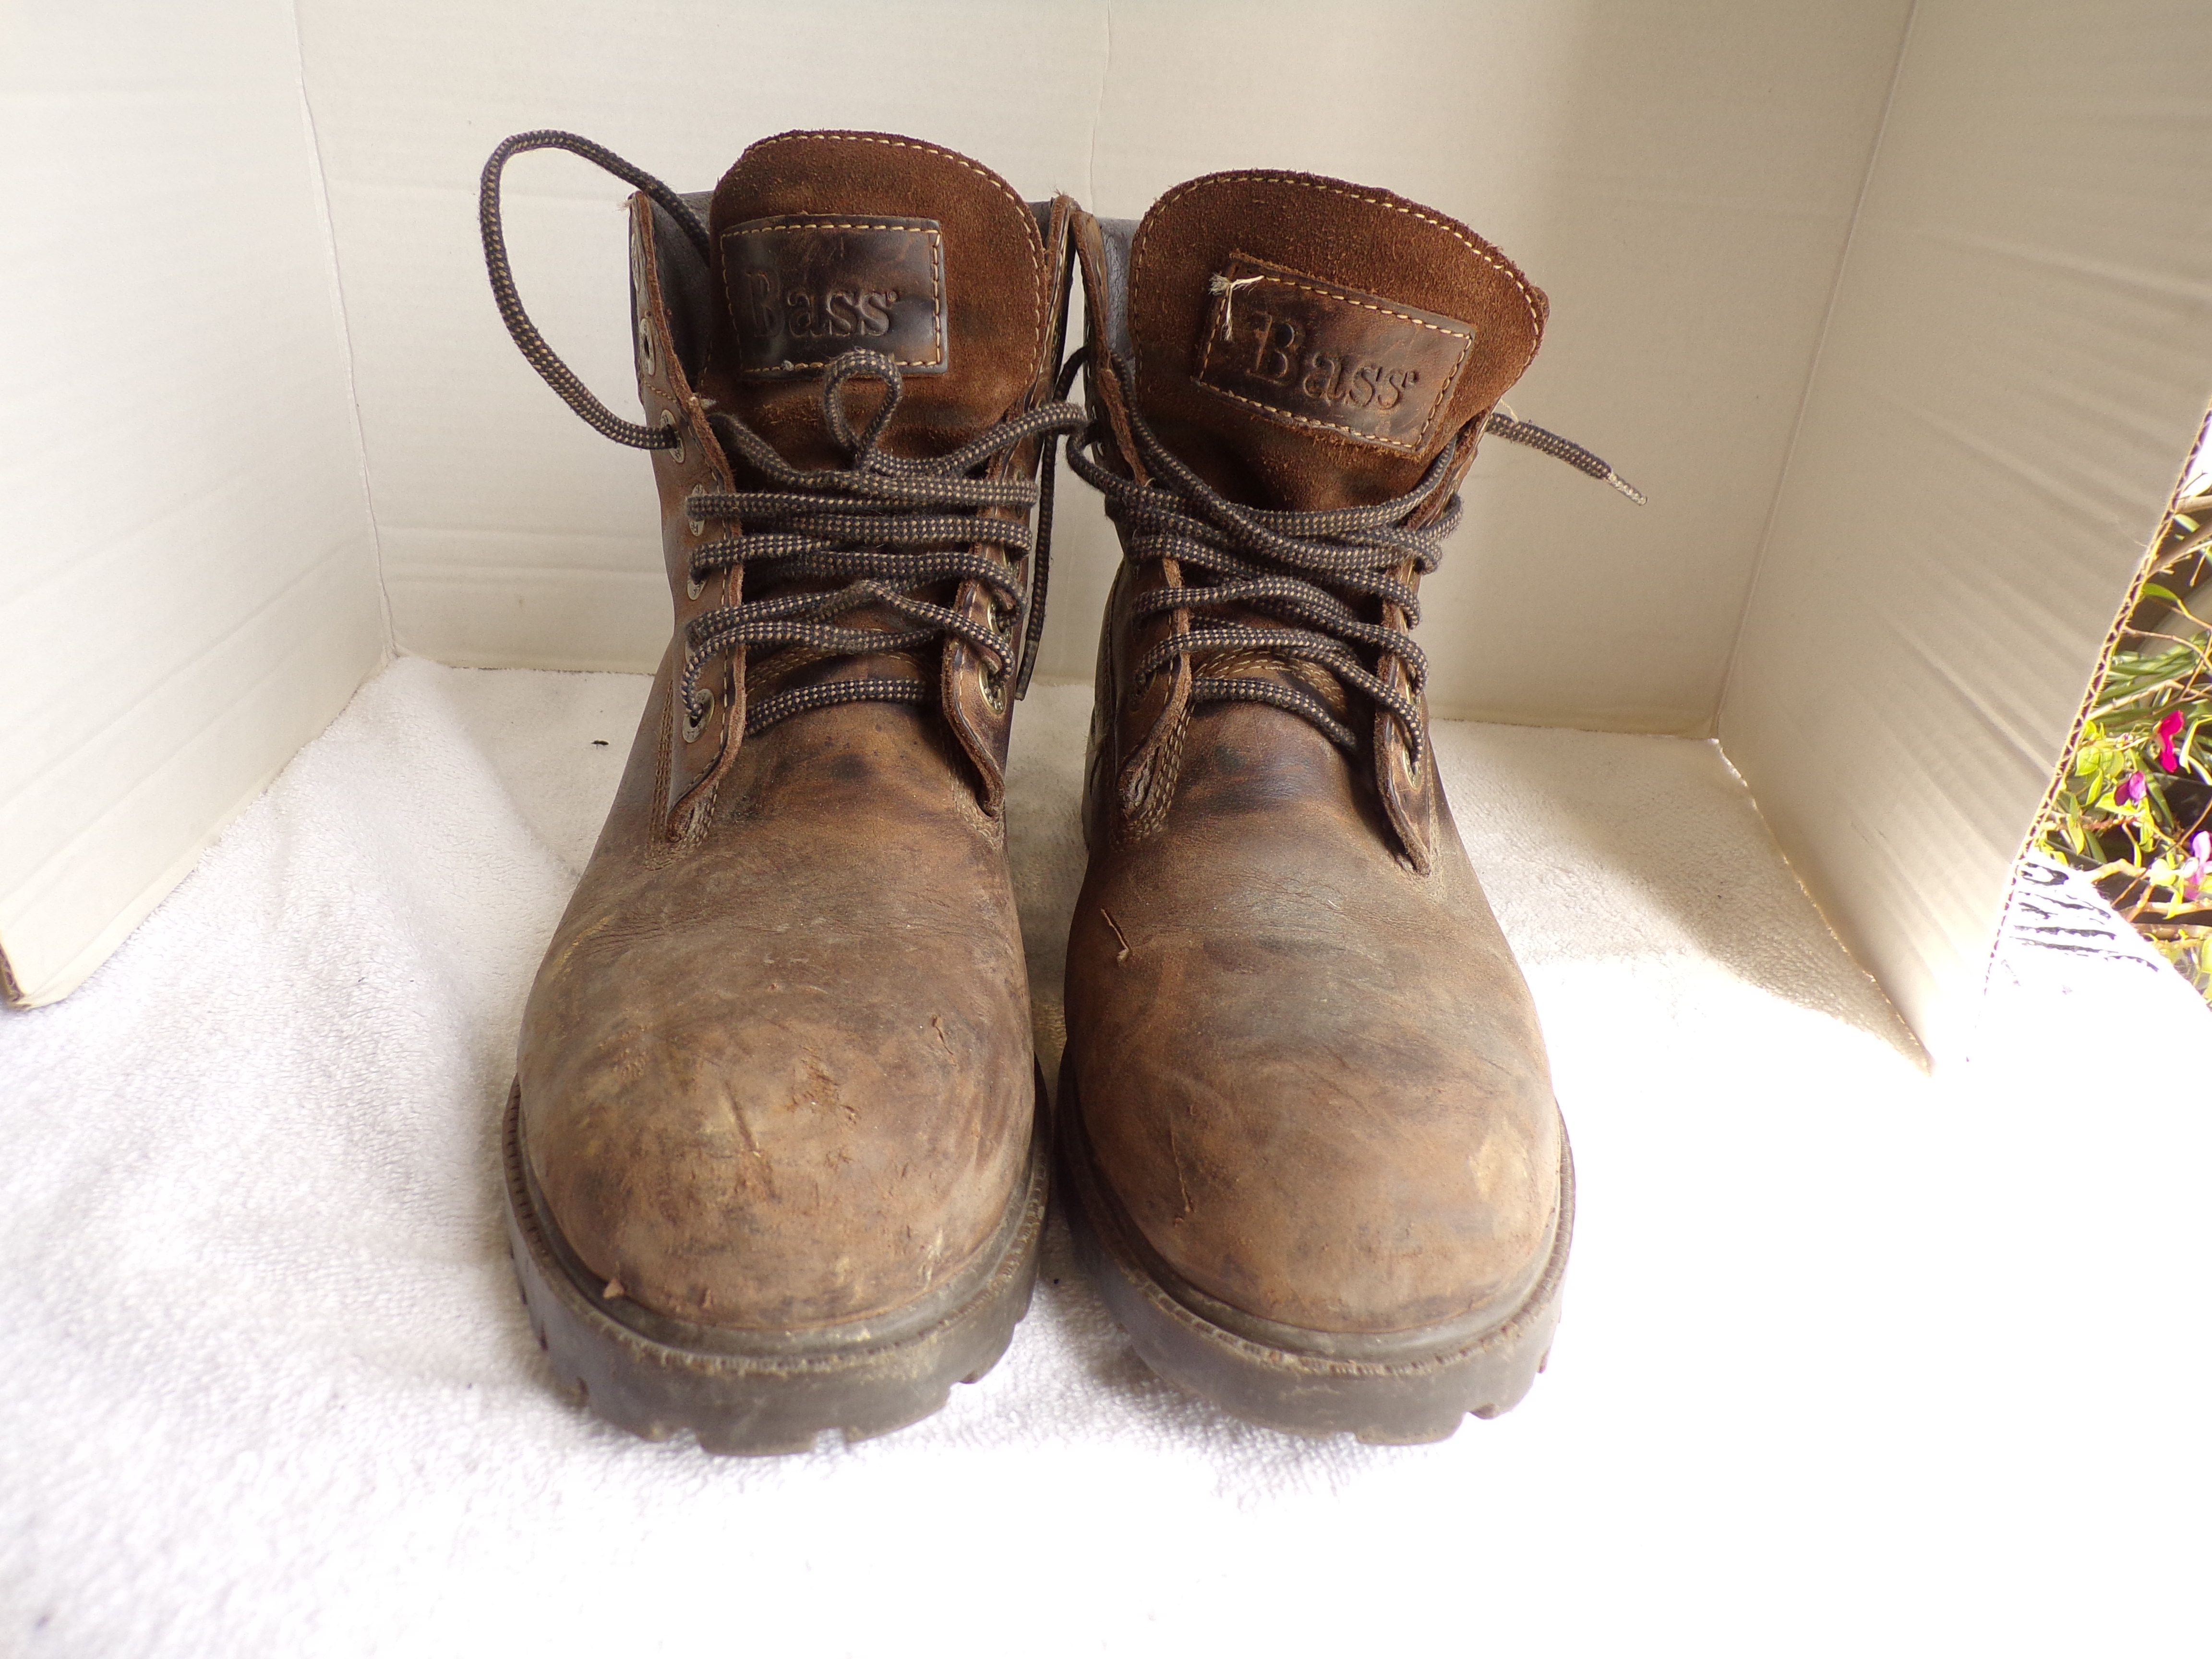 Bass Brown Thick Leather Water Proof Work Boots Size 9.5